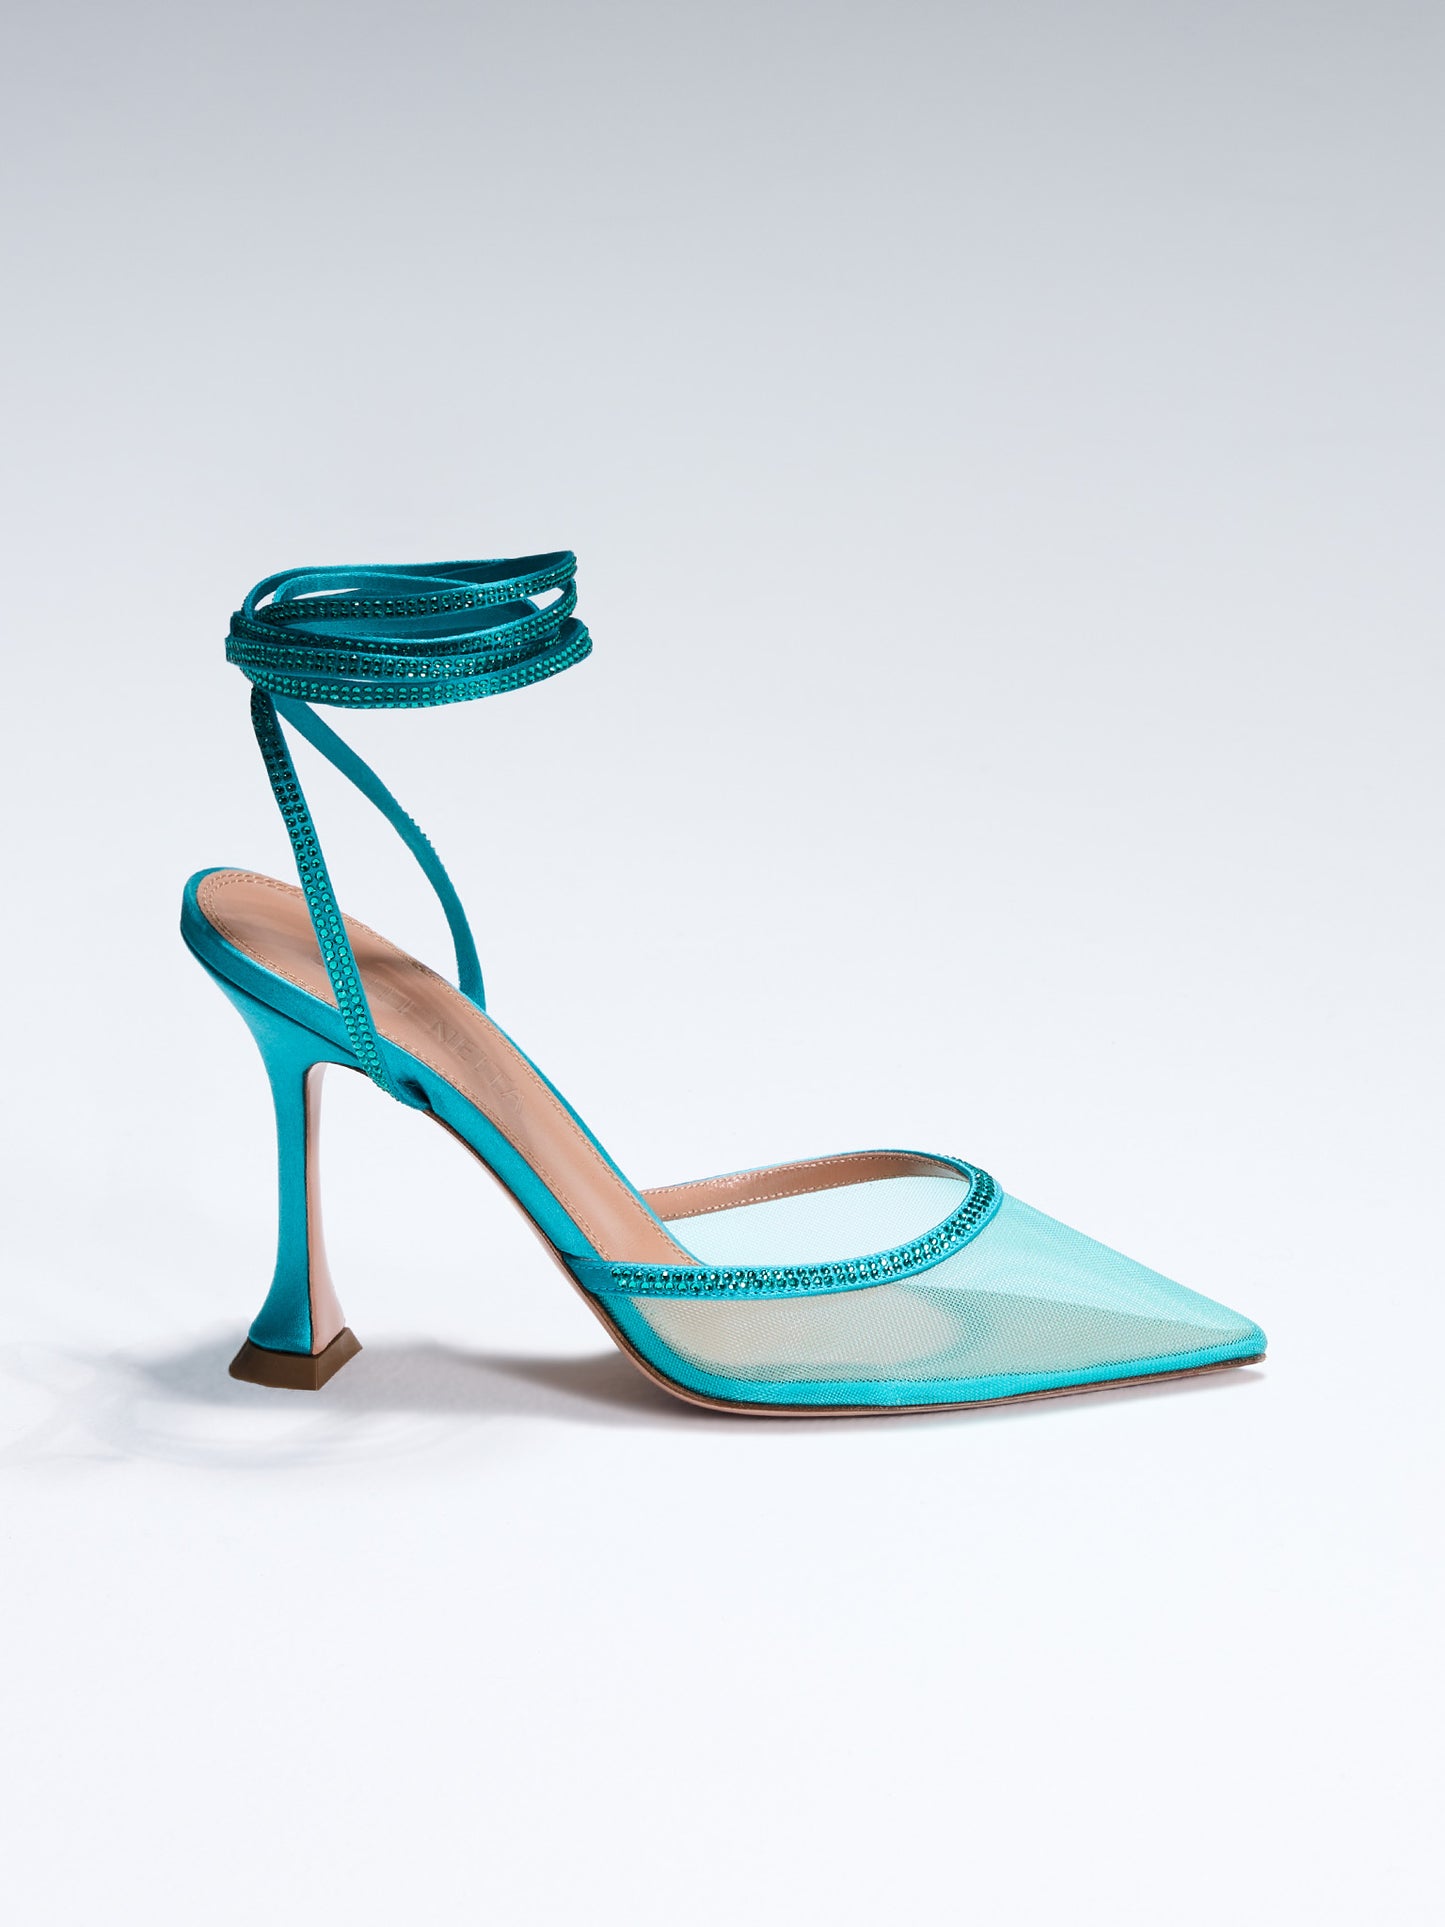 Dani Lace up on Model. TEAL SATIN LACE-UP WITH CRYSTAL EMBELLISHMENT Hand-crafted in Italy, the Dani (“Dani”) lace-up features a glossy teal satin and is set upon our custom 95mm heel designed for your comfort. Dani is accented with our signature mesh upper that gently molds to your foot and is adorned with rows of glistening crystals that wrap around your foot and leg for an irresistible touch of sparkle.